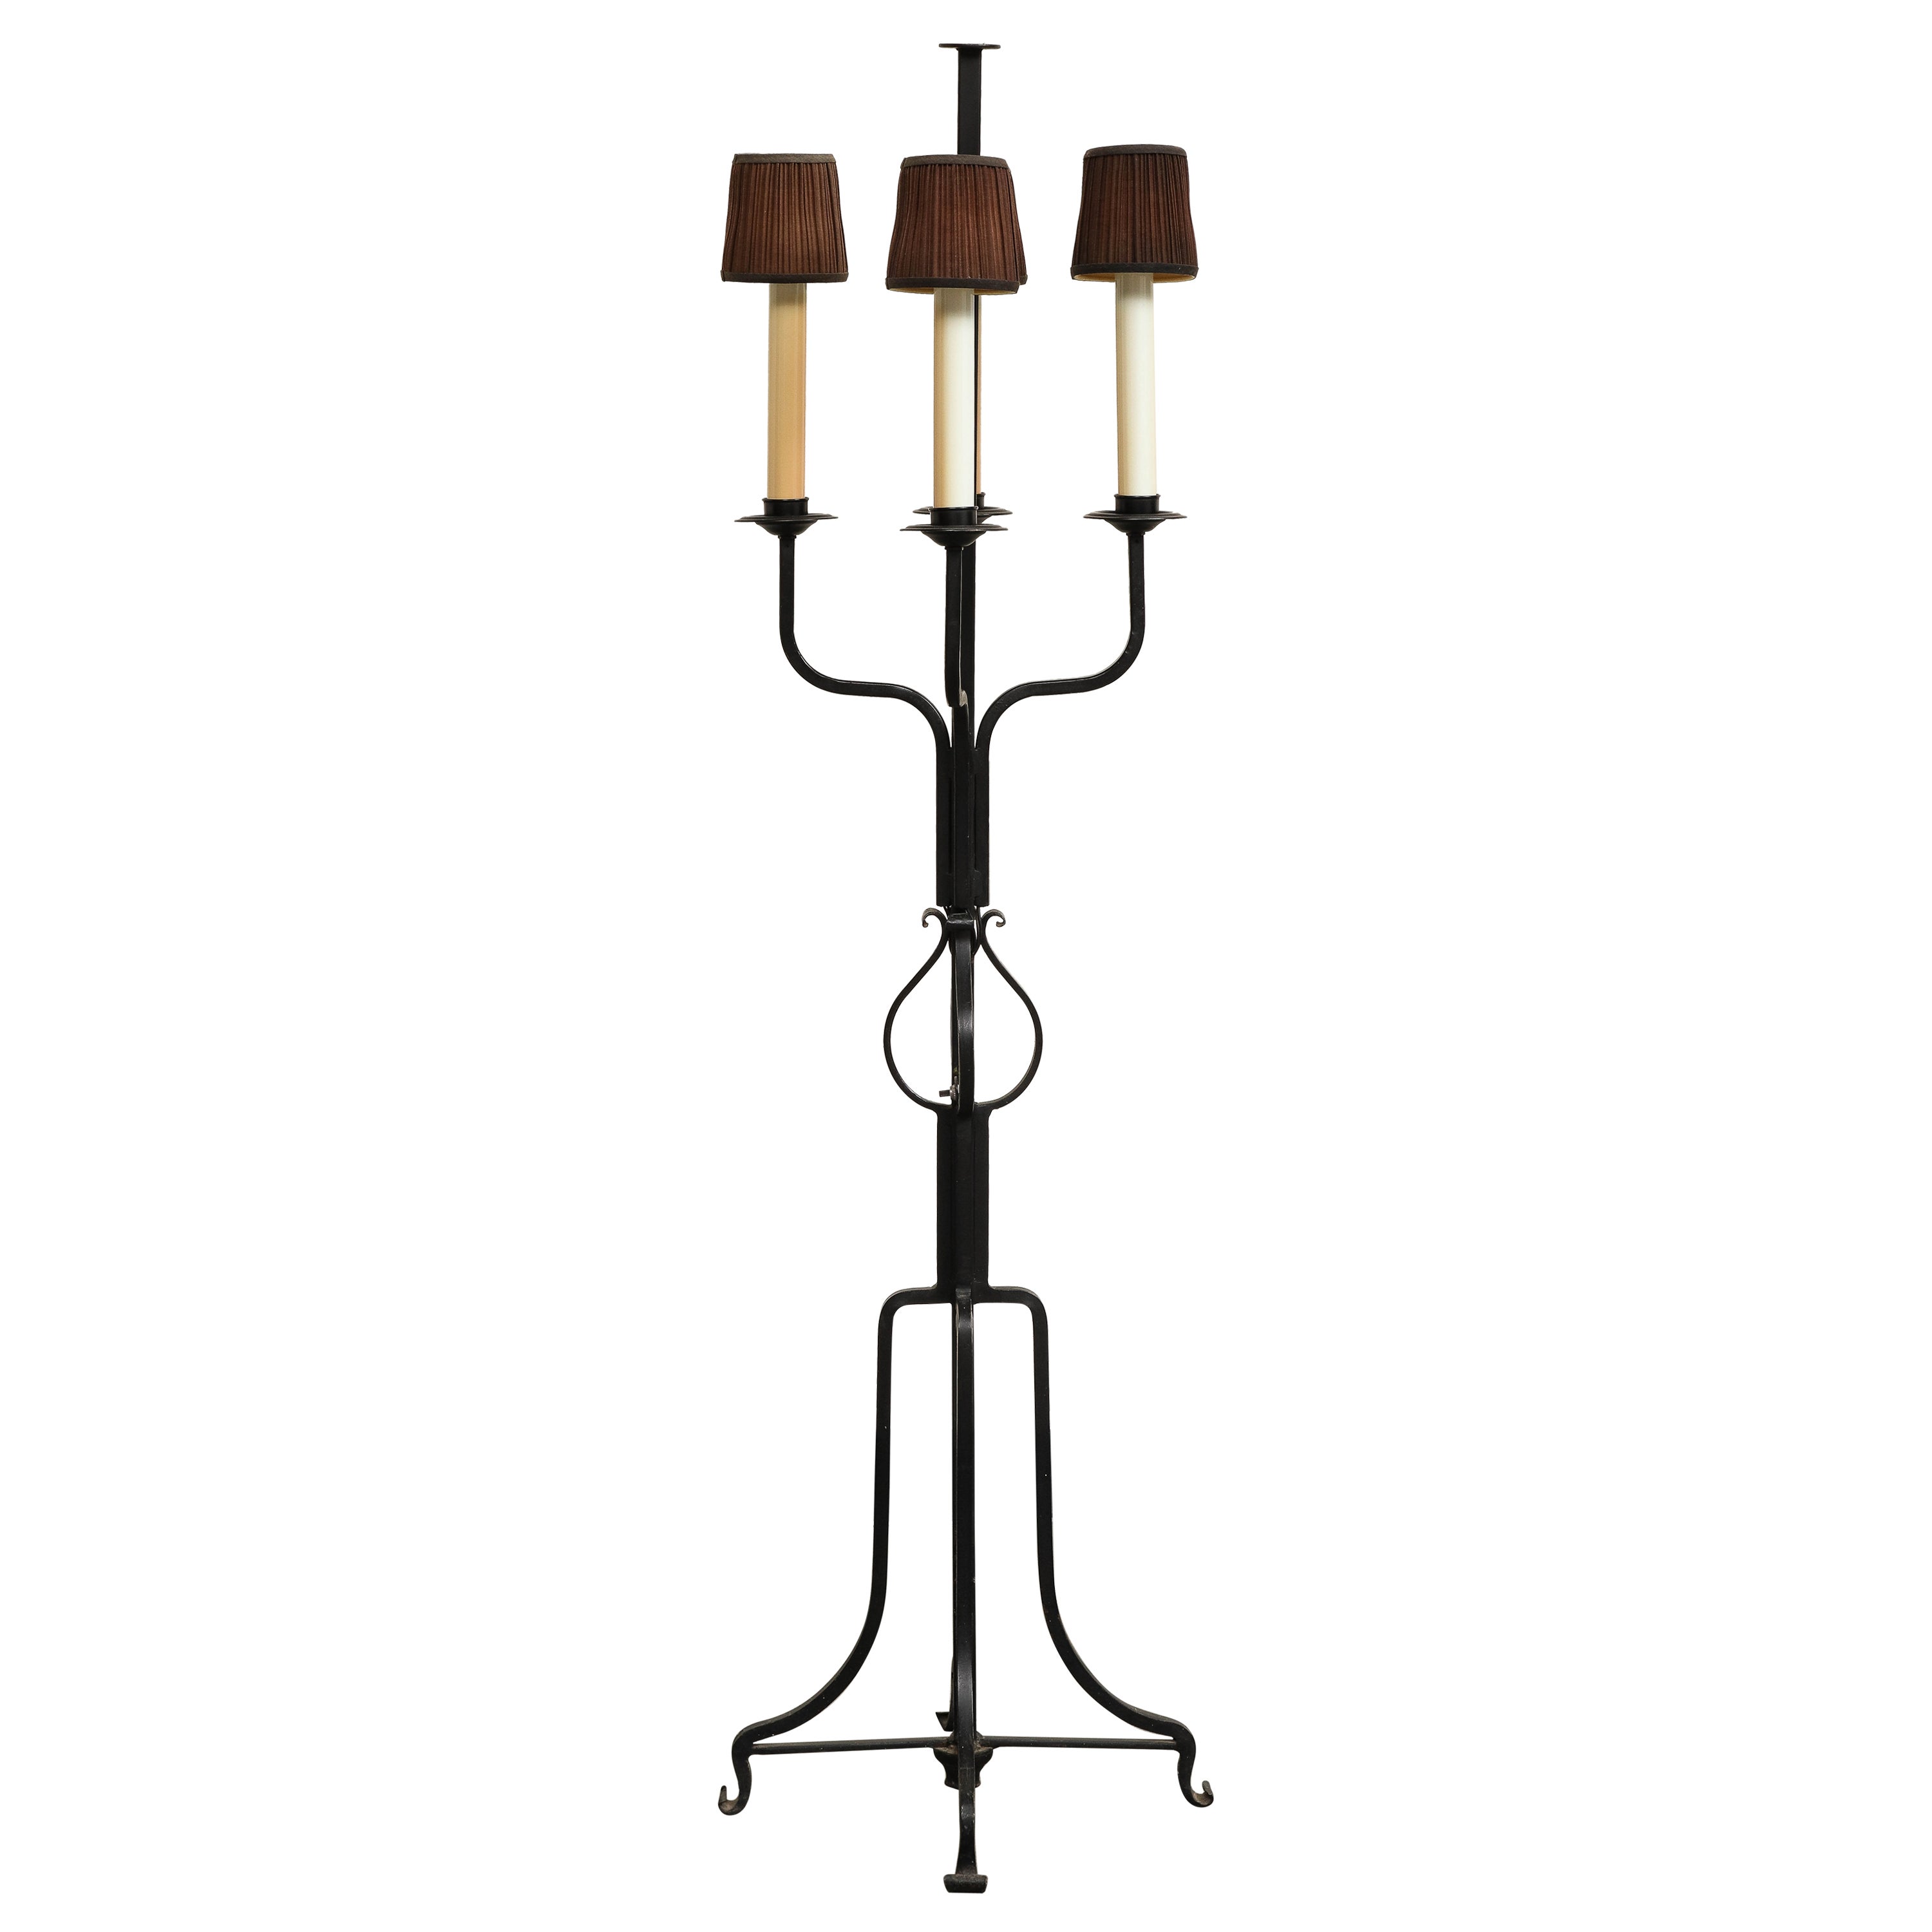 Midcentury Iron Candlestick Floor Lamp, attributed to Tommi Parzinger